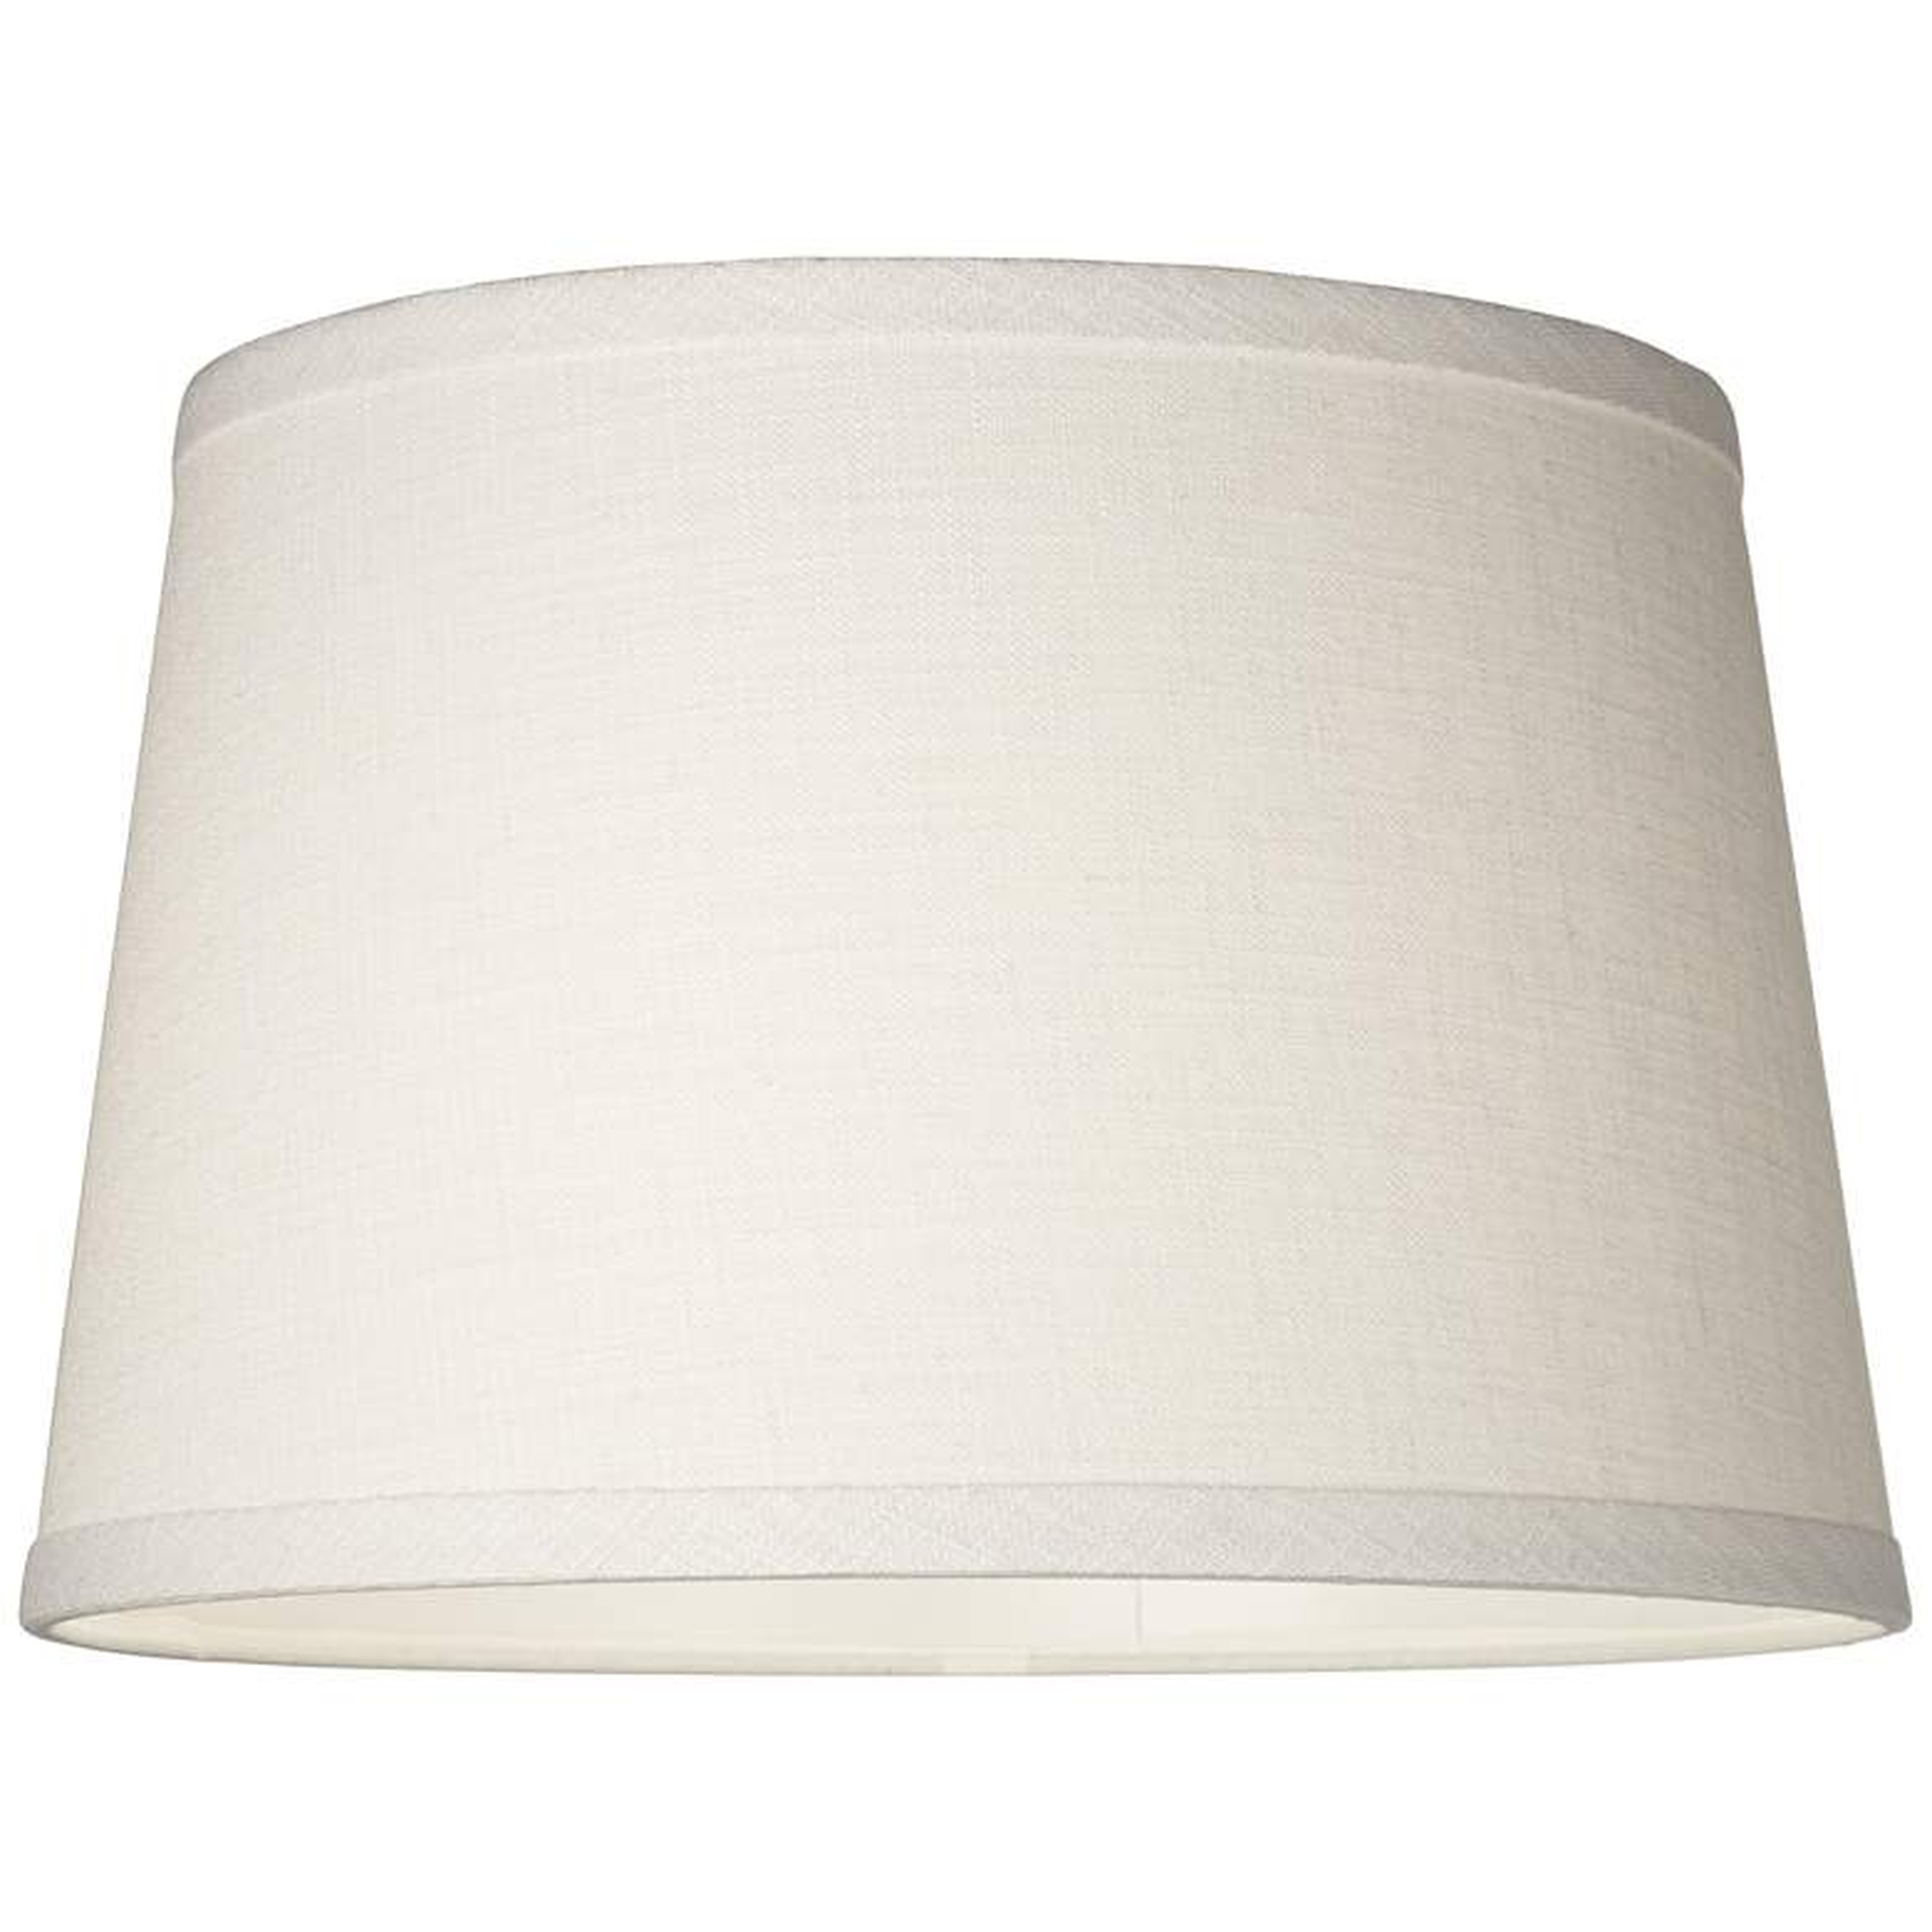 White Linen Drum Lamp Shade 10x12x8 (Spider) - Style # 35H43 - Lamps Plus